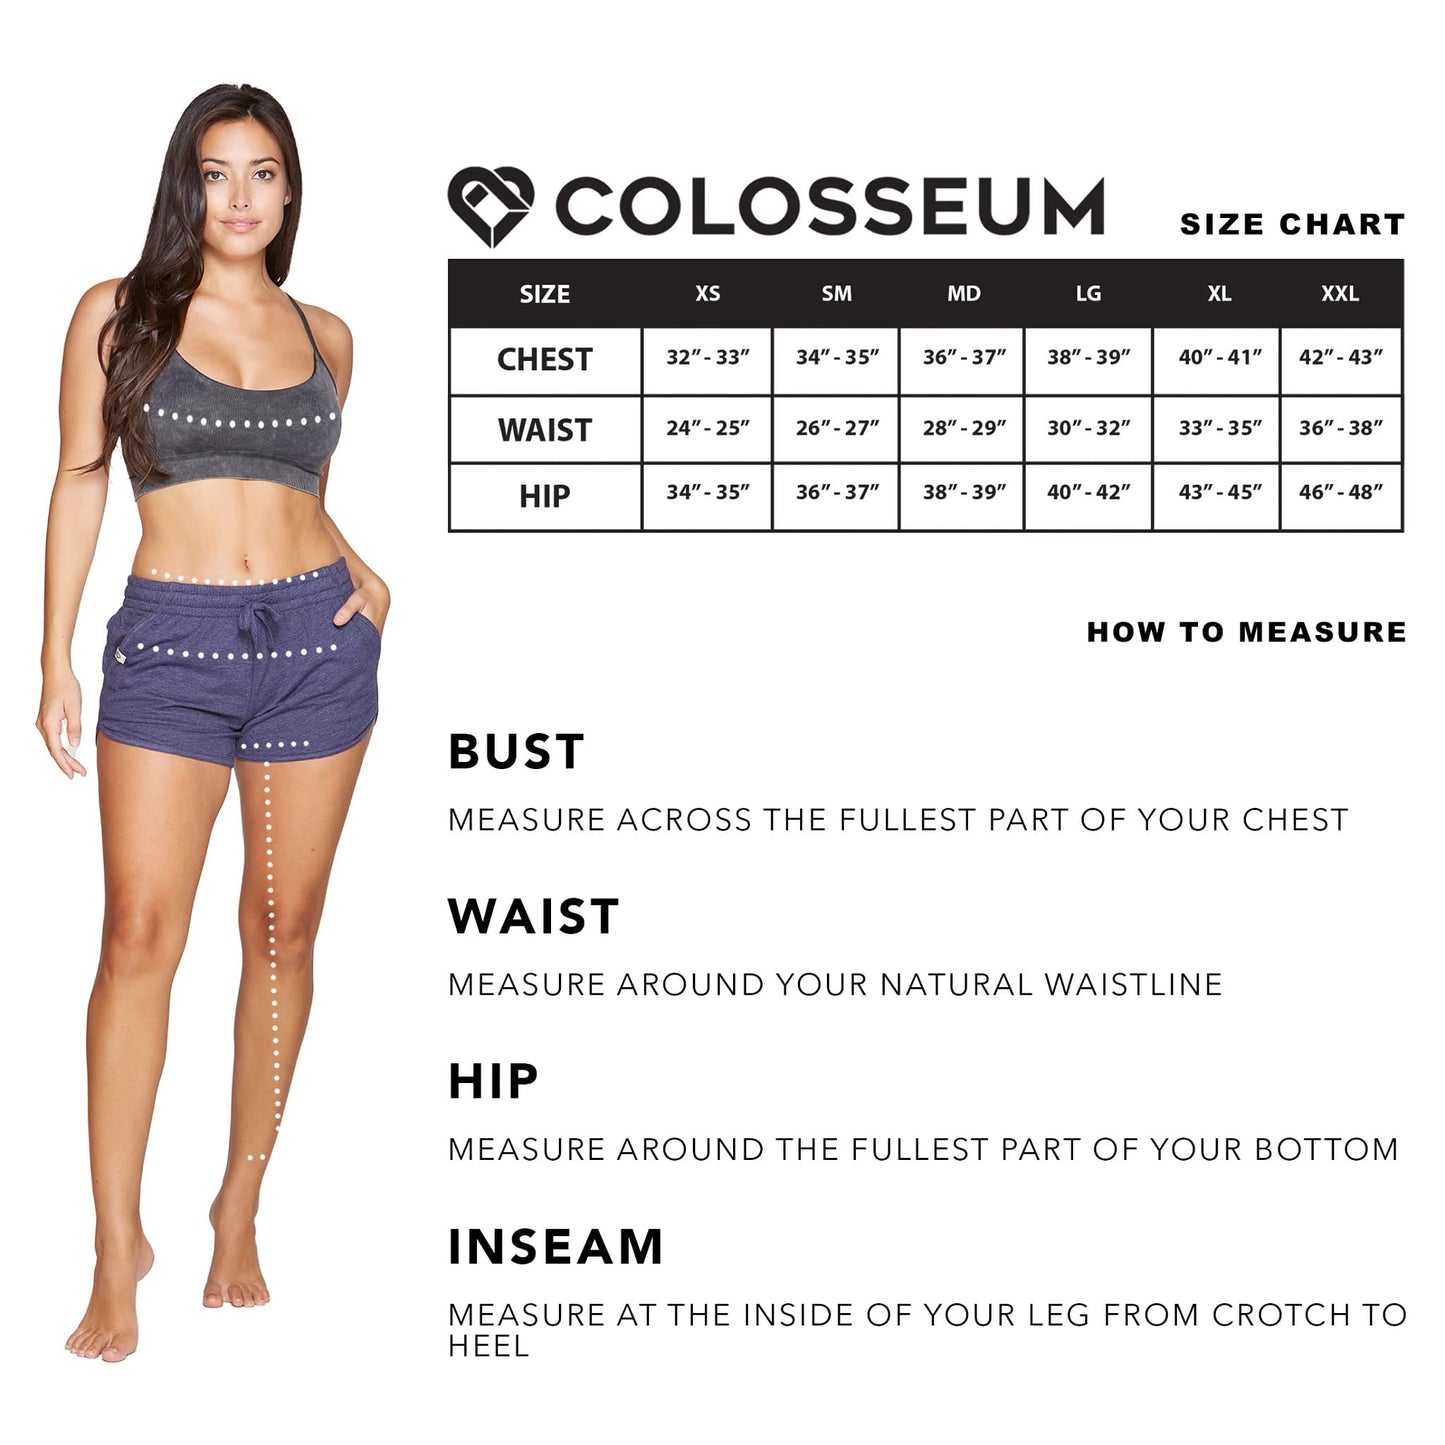 Colosseum Active Women's Simone 2.0 Cotton Blend Yoga and Running Short (Amethyst, X-Small)